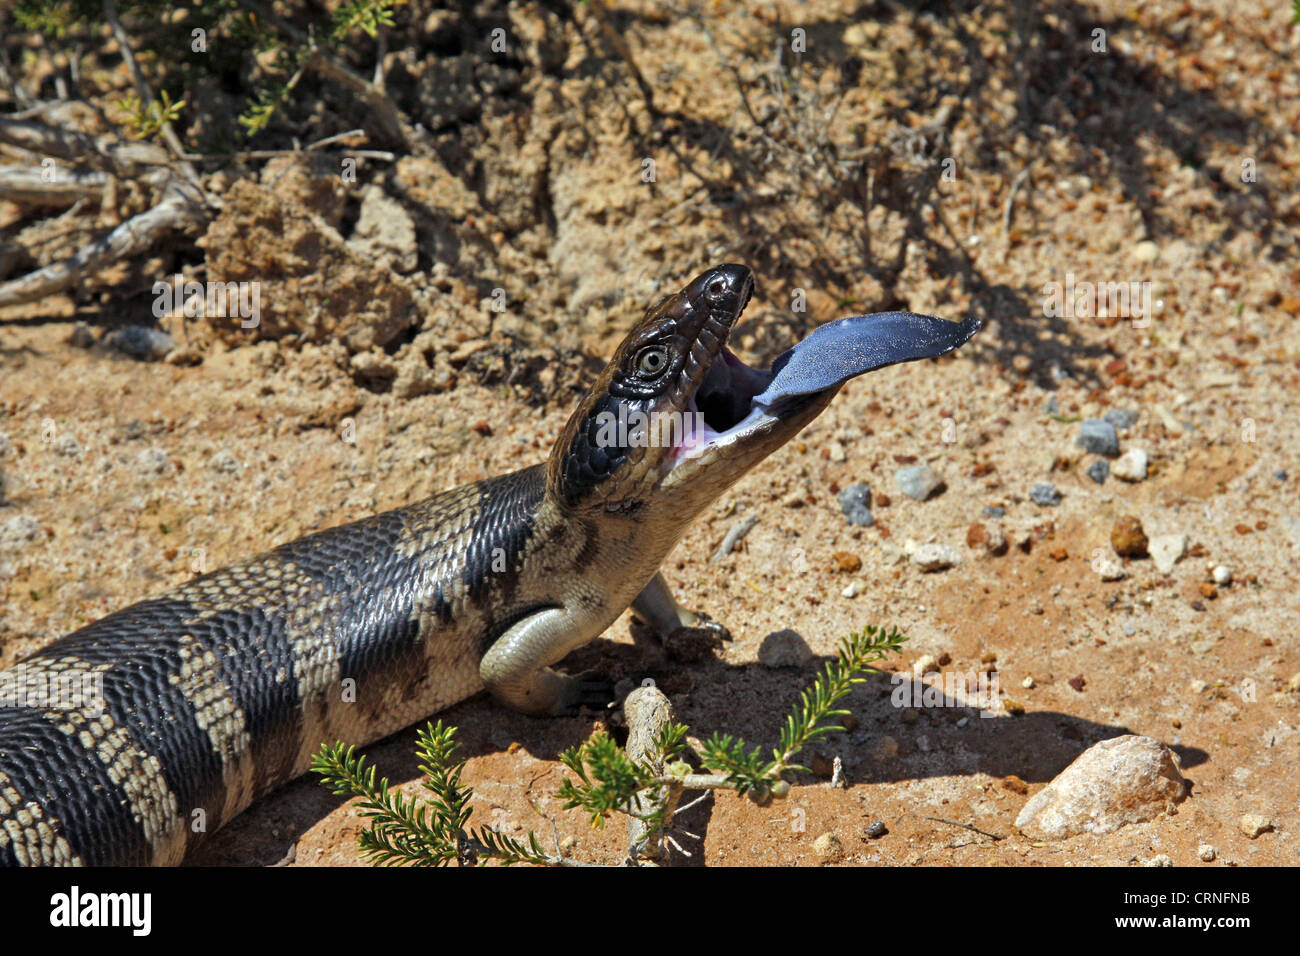 Western Blue-tongued Skink (Tiliqua occipitalis) adult, sticking out blue tongue in defensive behaviour, Western Australia, Stock Photo